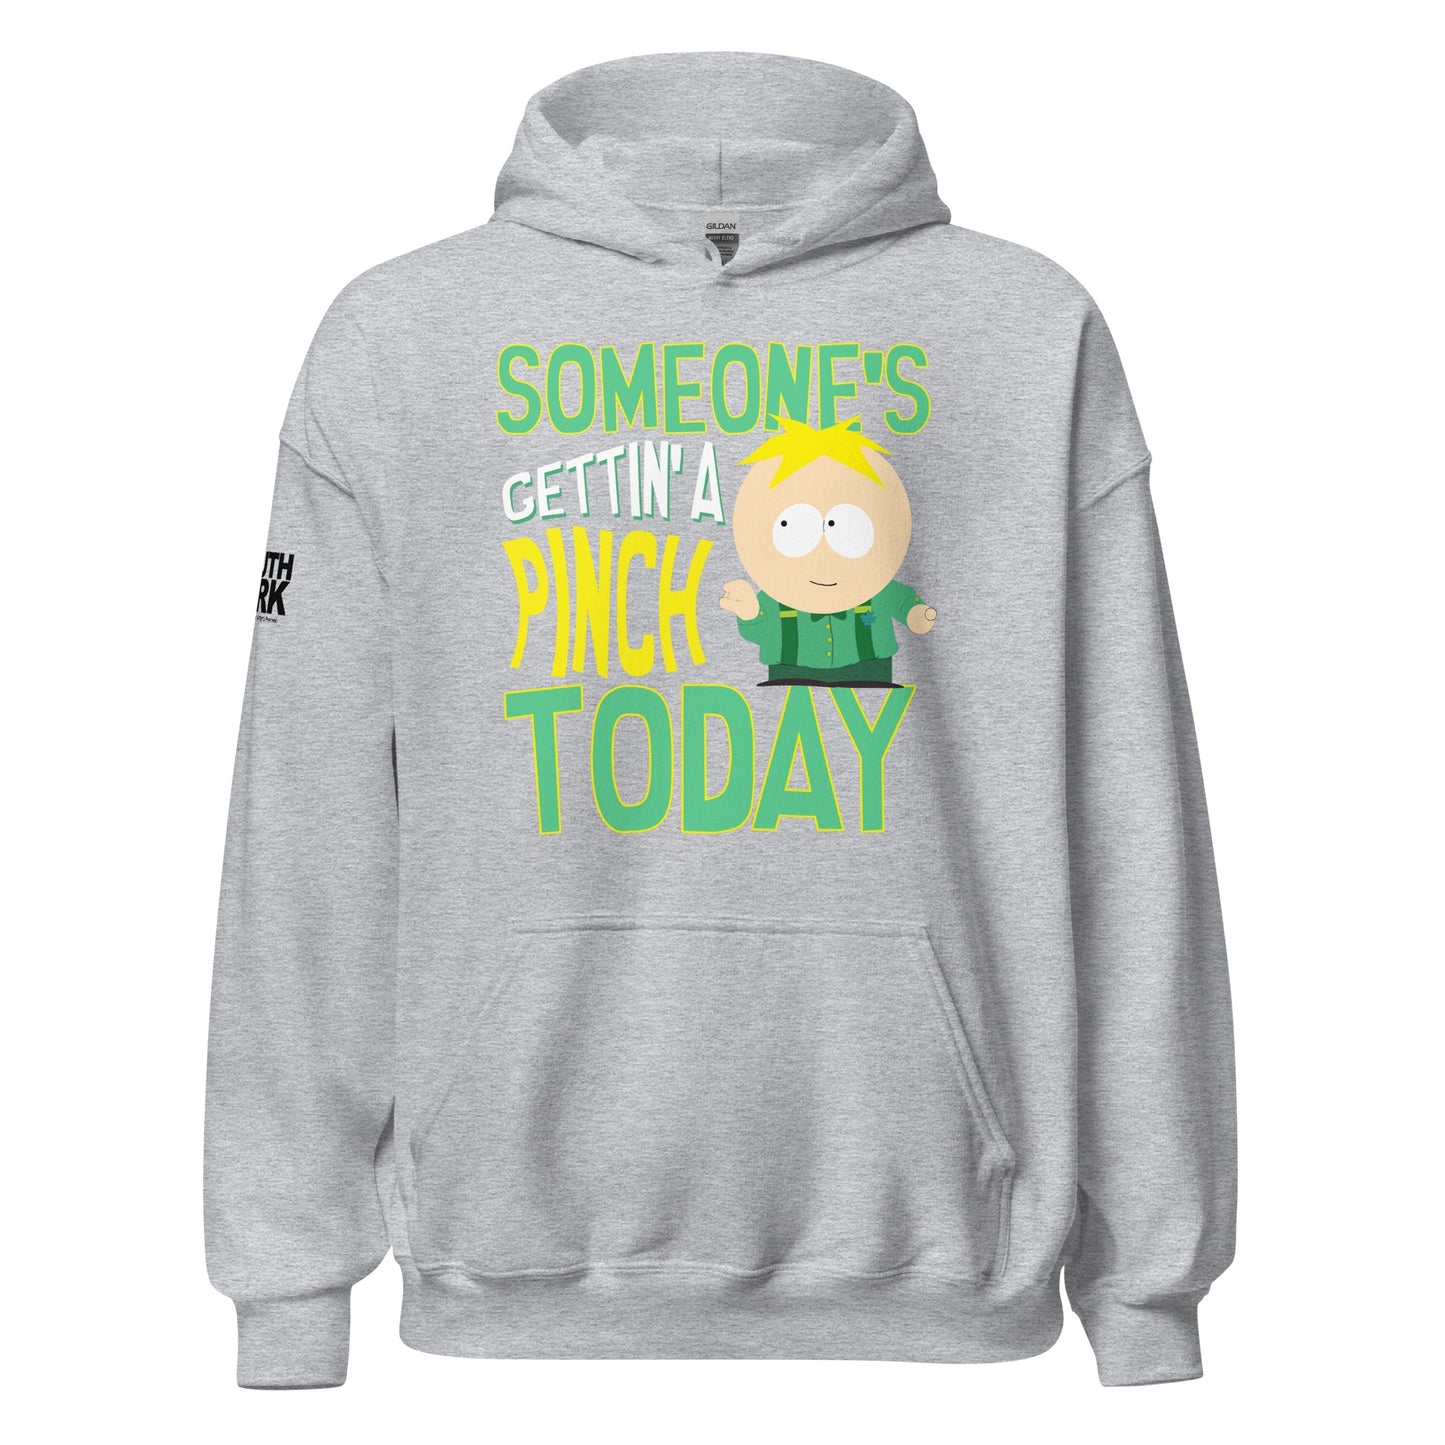 South Park Butters Someone's Getting A Pinch Today Sweatshirt à capuche